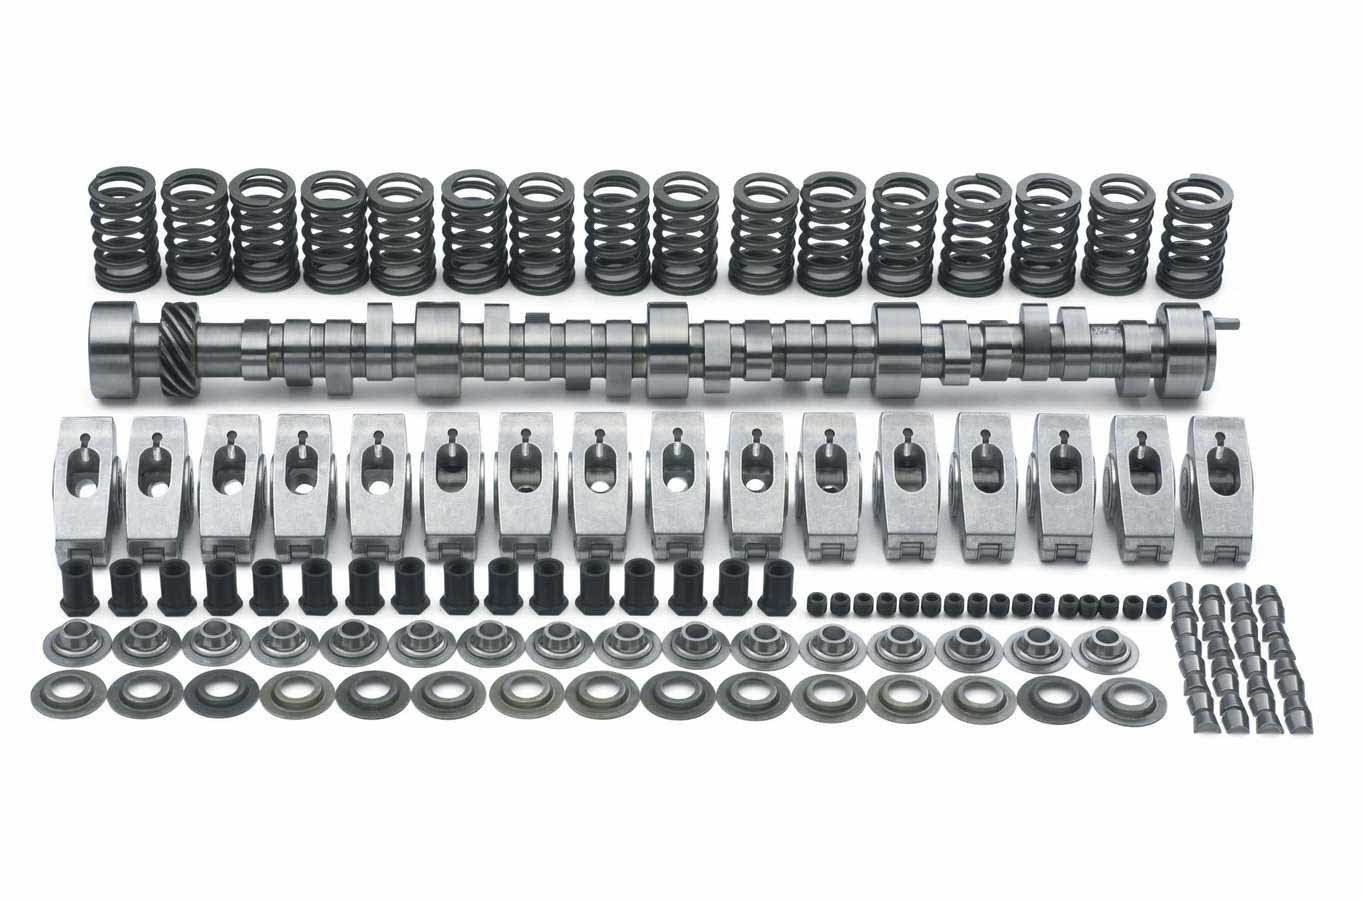 Camshaft/Lifters/Rockers/Springs, LT4 Hot Camshaft, Hydraulic Roller, Lift 0.492/0.492 in, Duration 218/228, 112 LSA